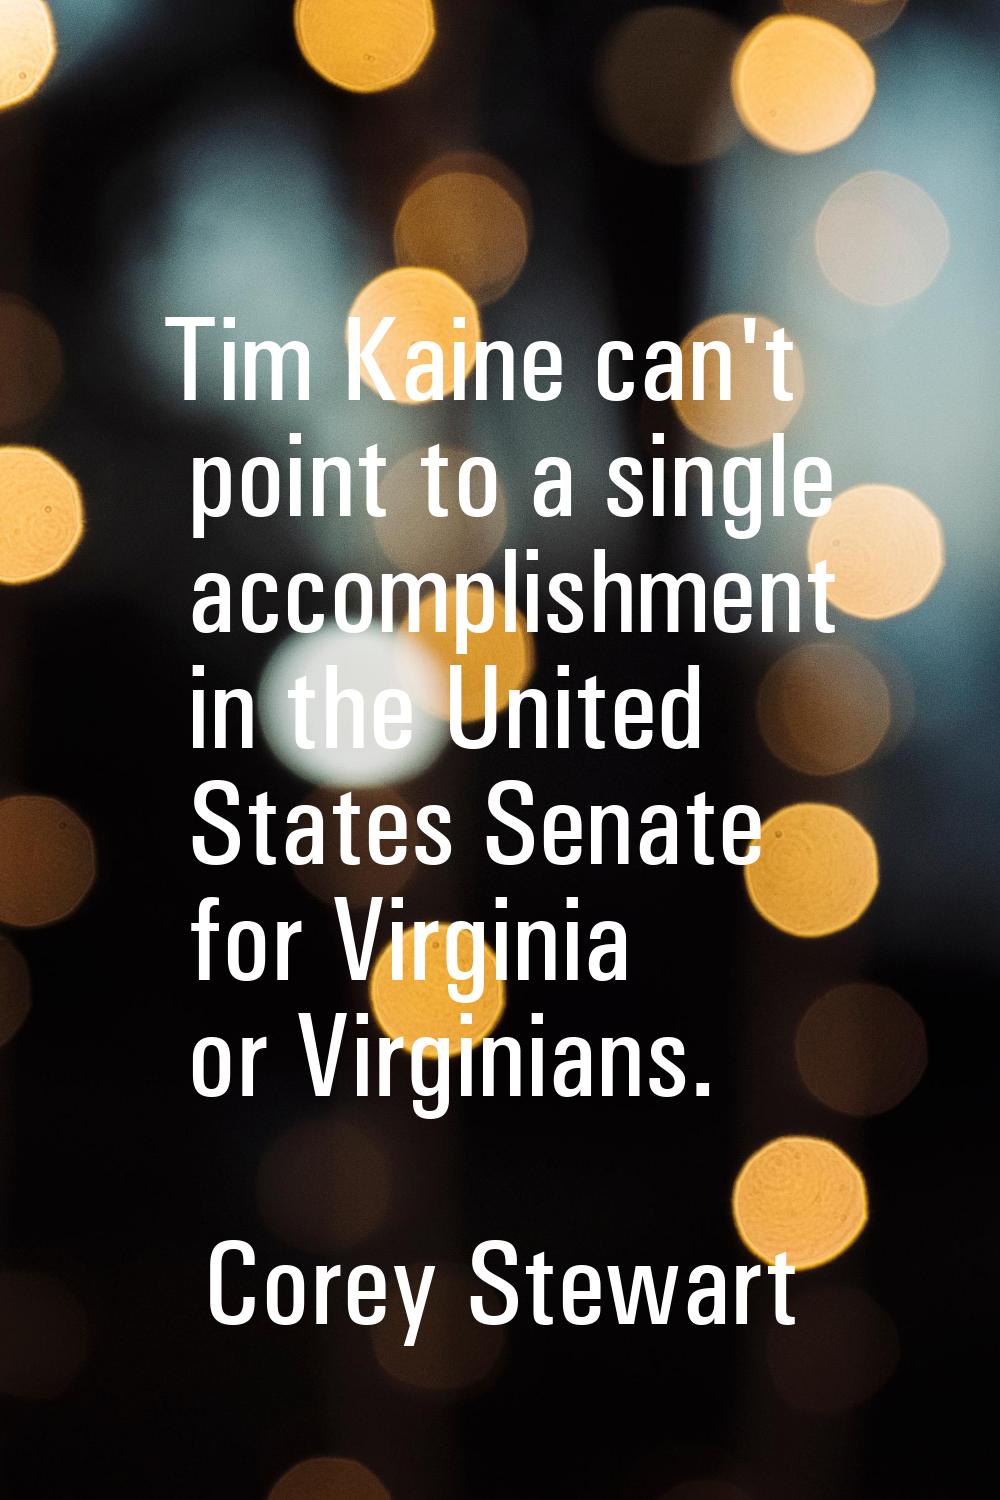 Tim Kaine can't point to a single accomplishment in the United States Senate for Virginia or Virgin